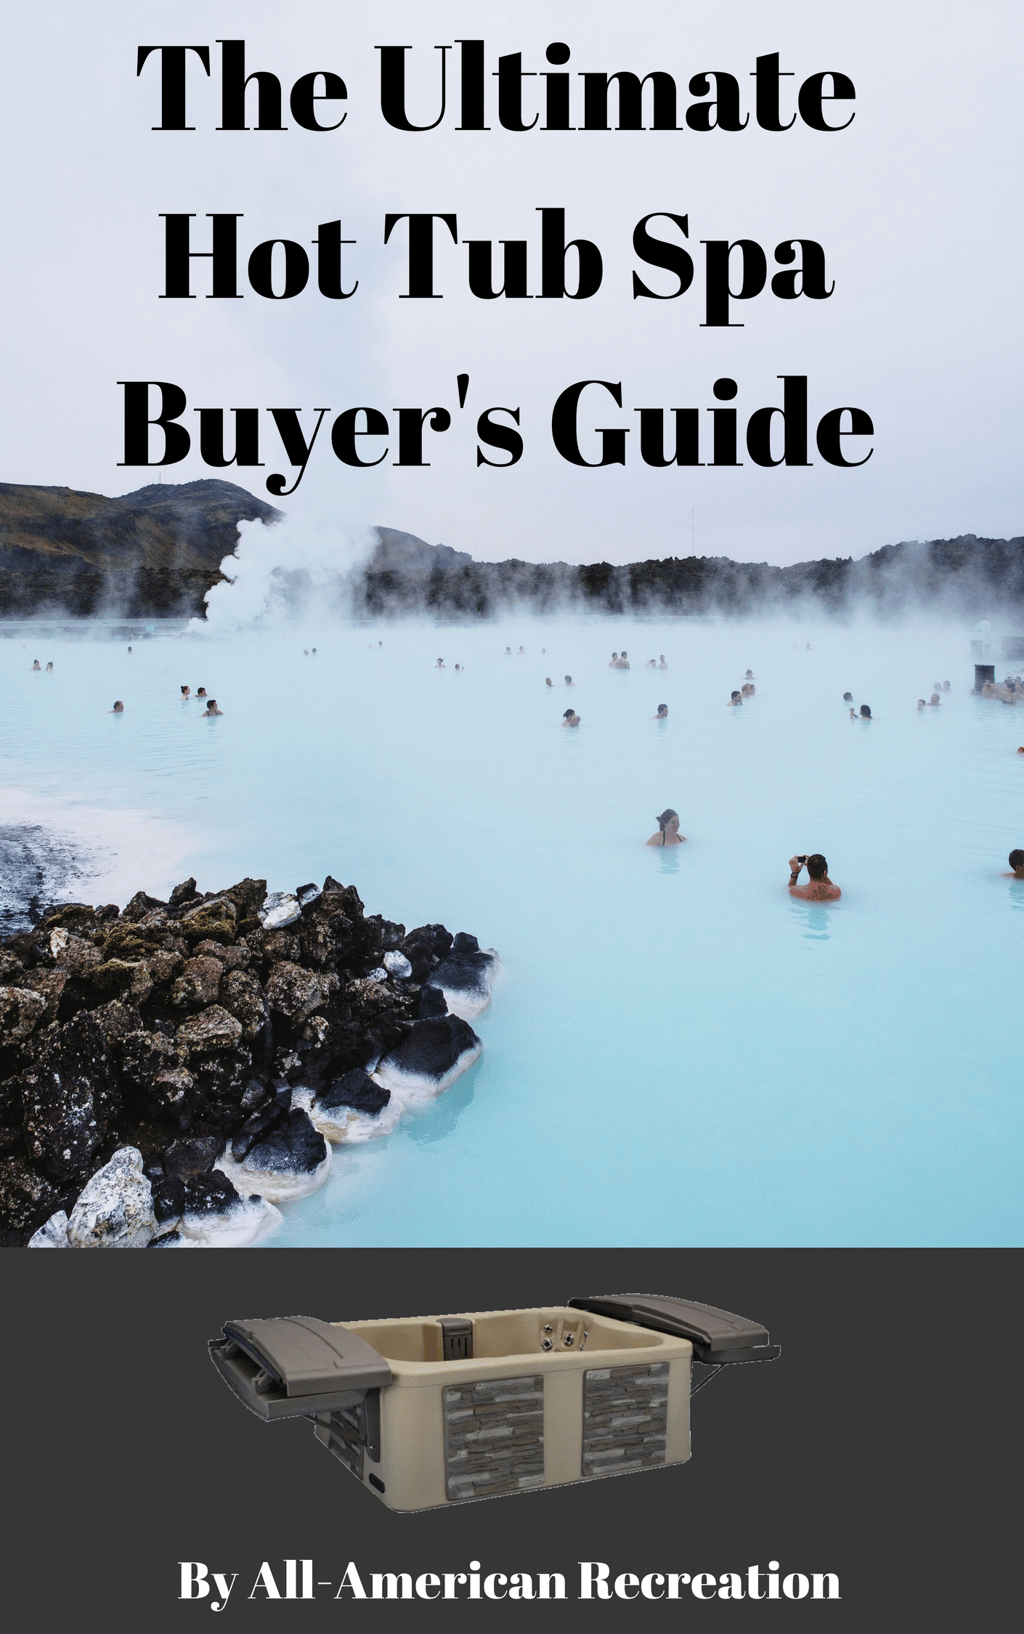 The Ultimate Hot Tub Spa Buyer's Guide